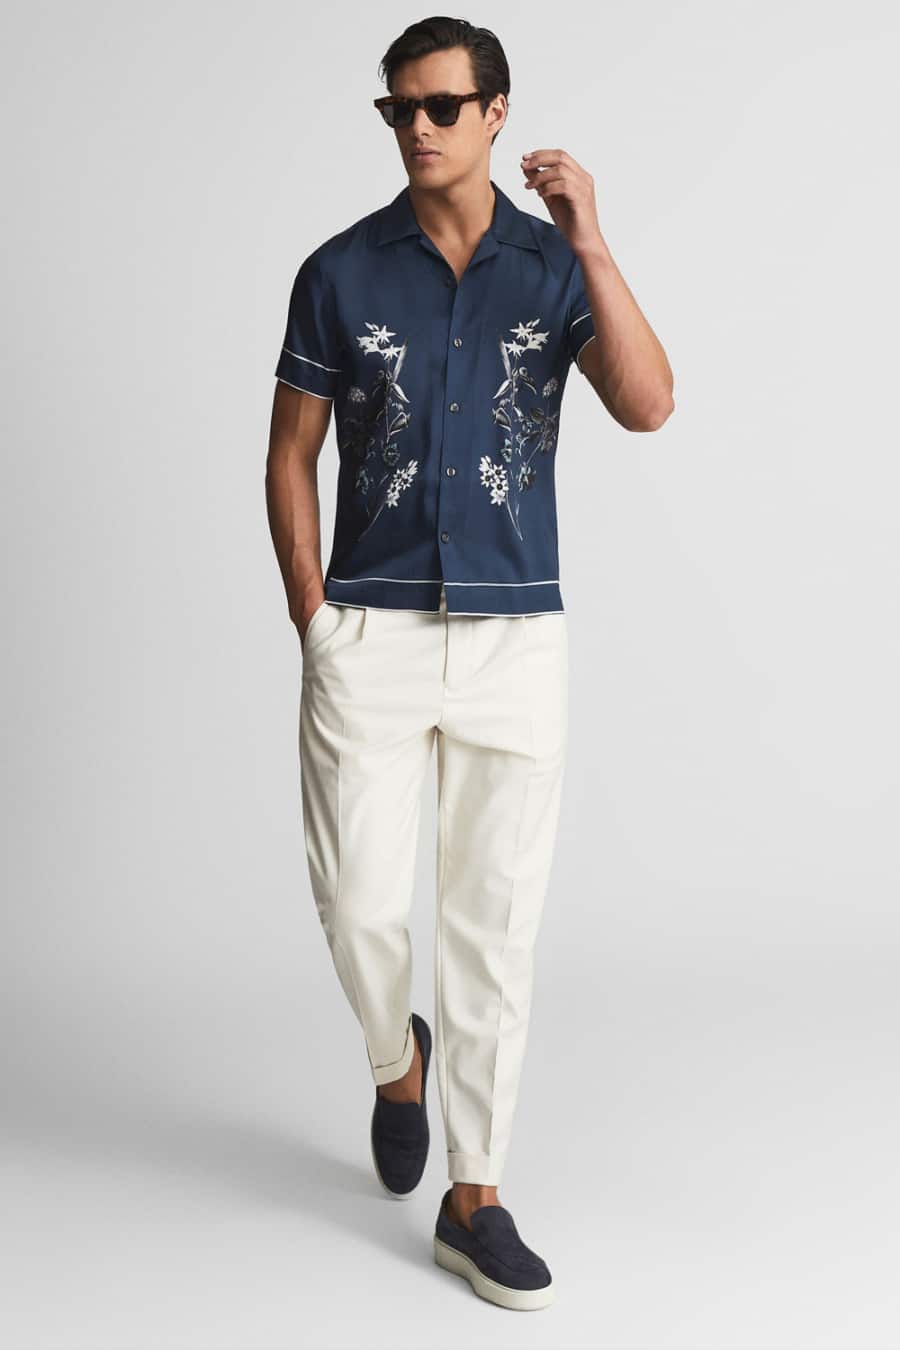 Men's dark floral shirt, white trousers and sneakers outfit